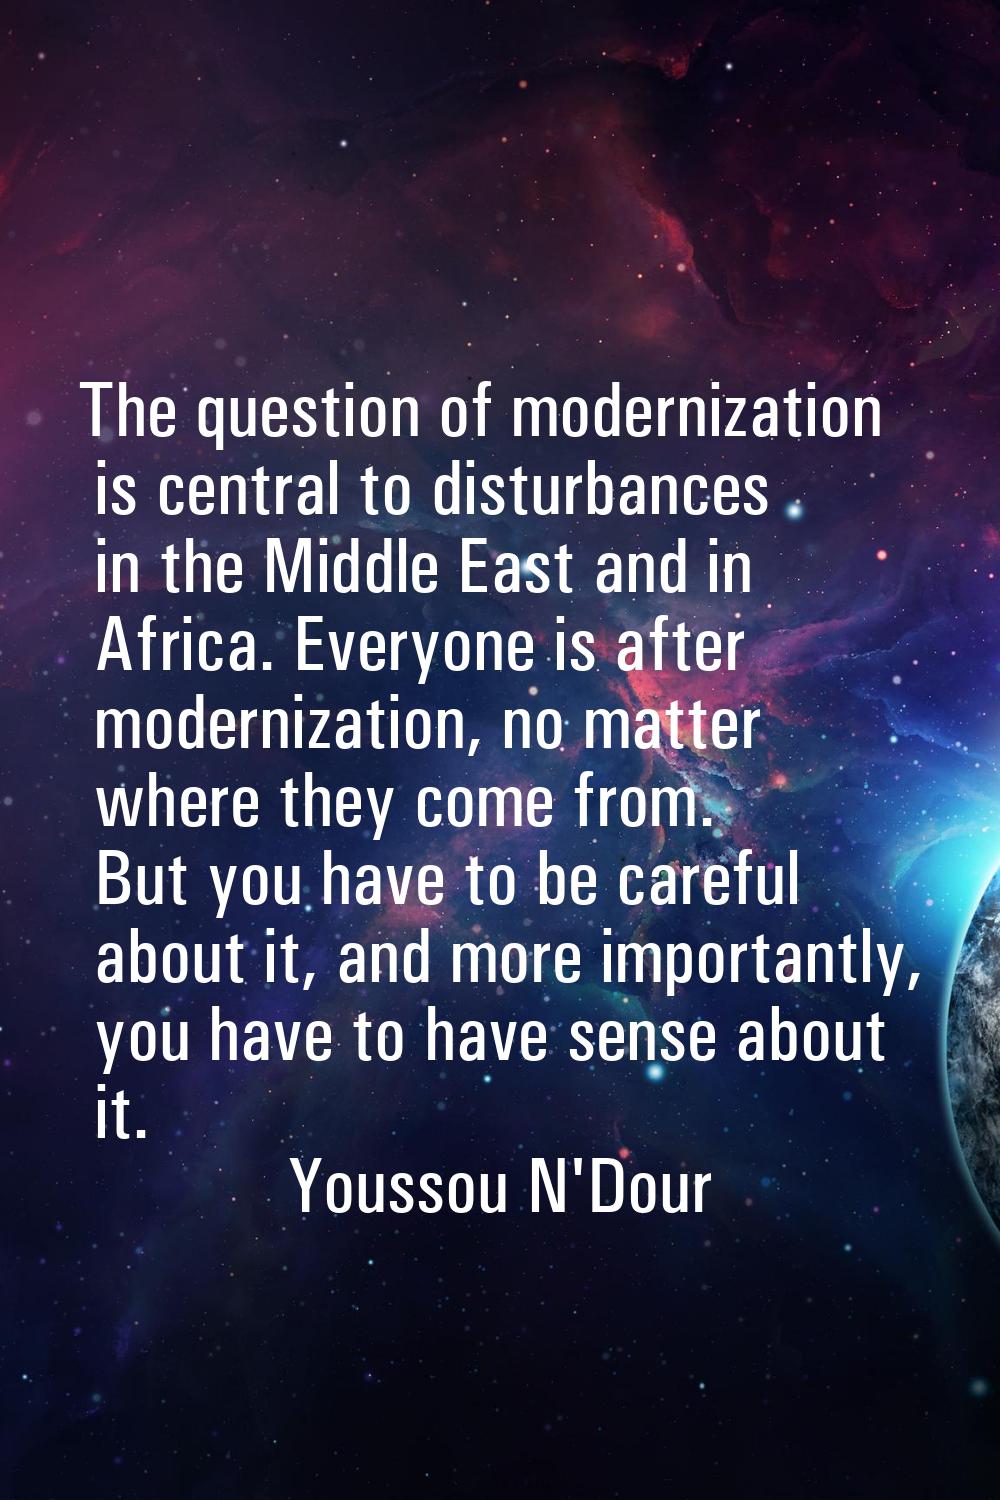 The question of modernization is central to disturbances in the Middle East and in Africa. Everyone